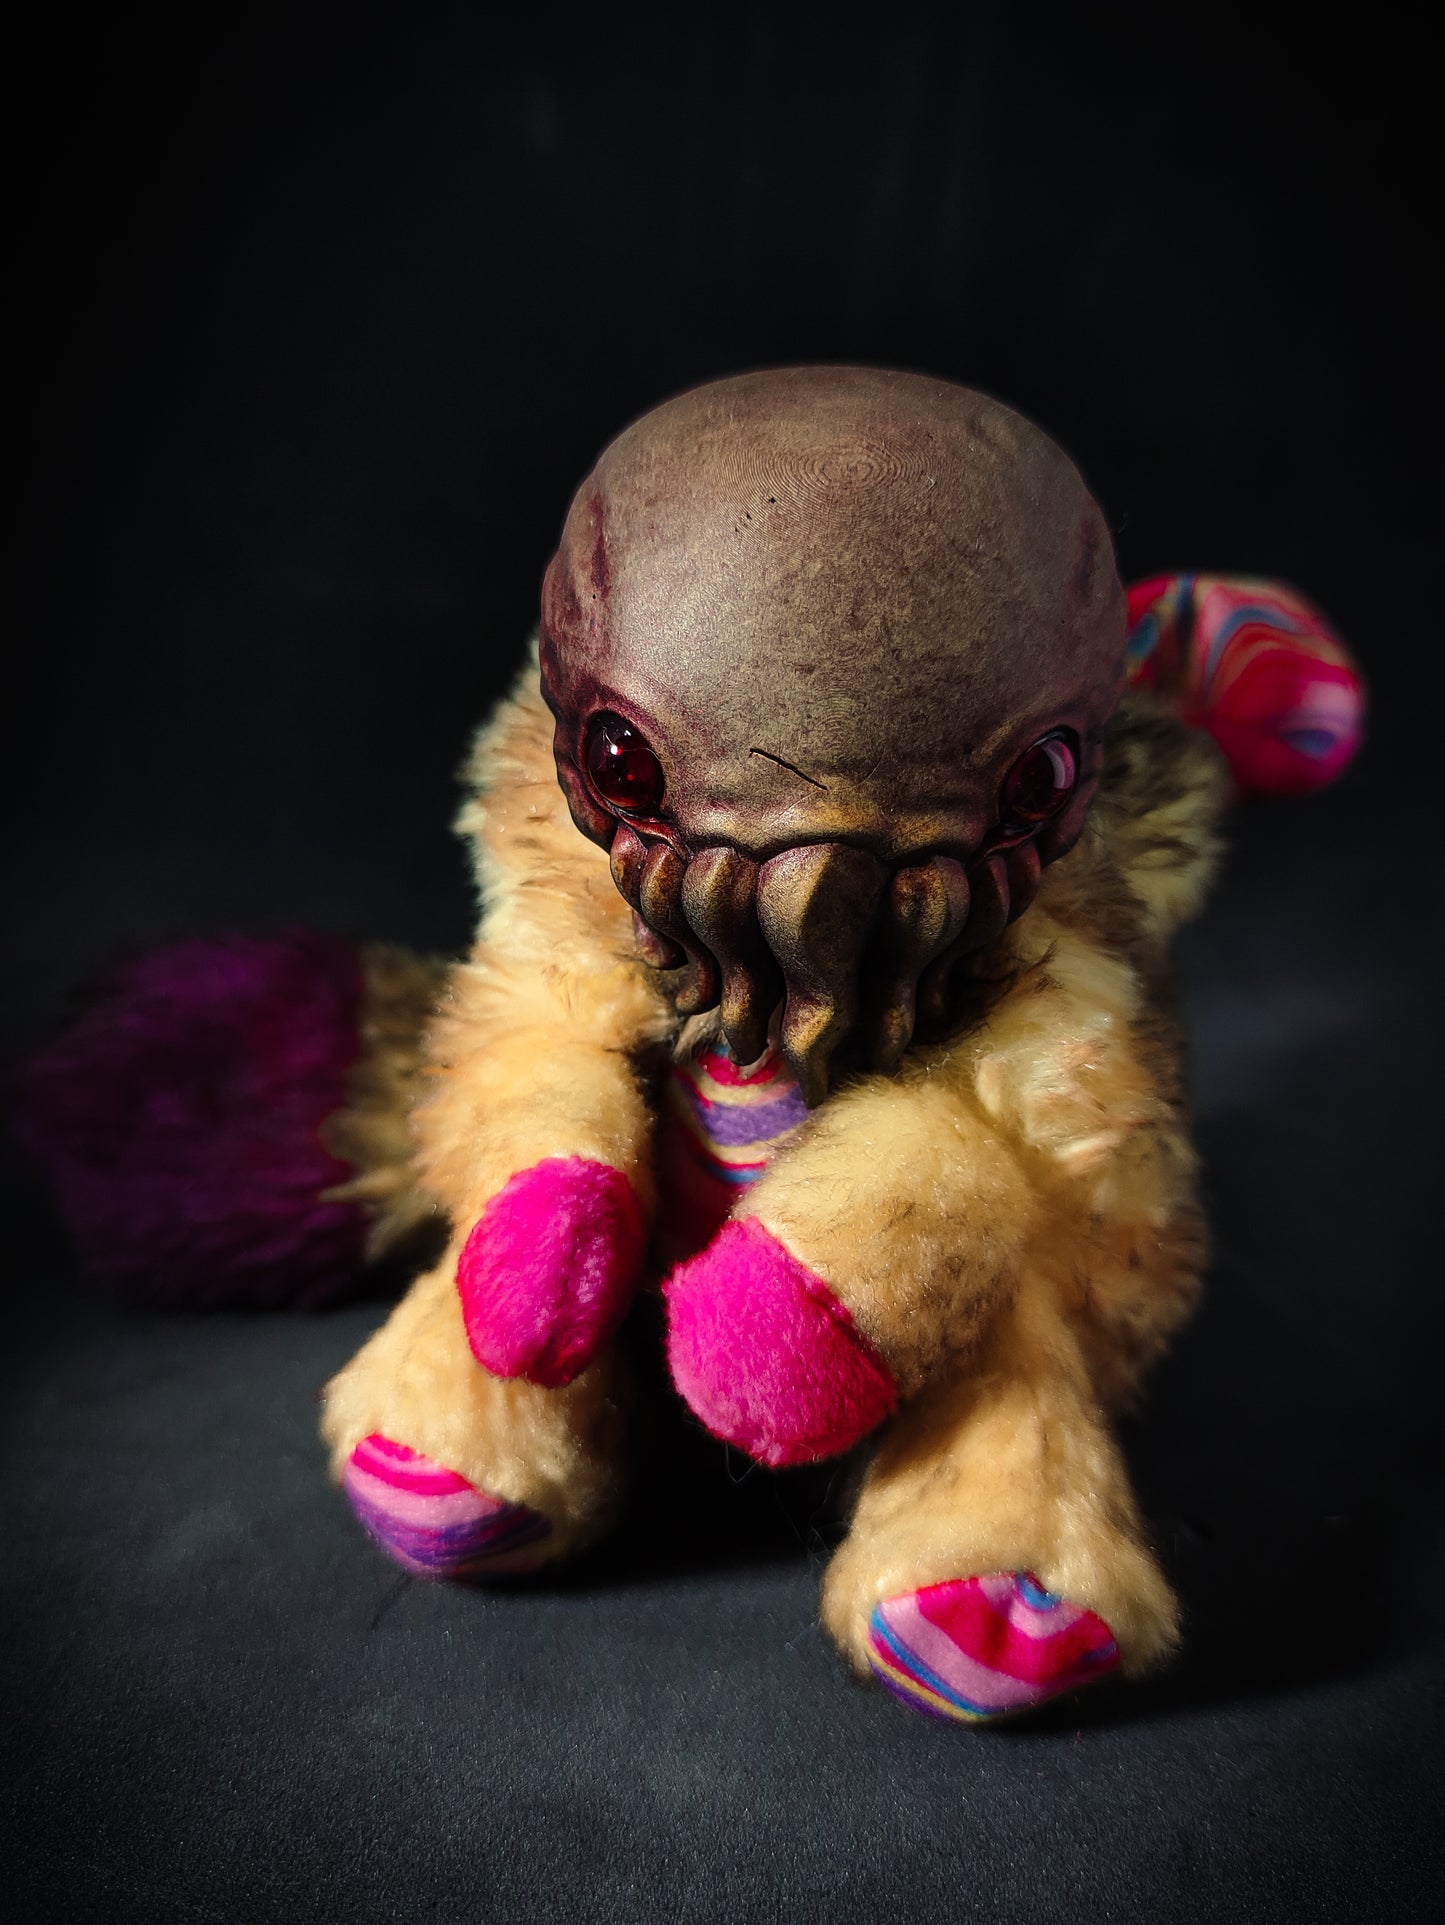 FRIENDTHULU King in Yellow Flavour - Cryptid Art Doll Plush Toy